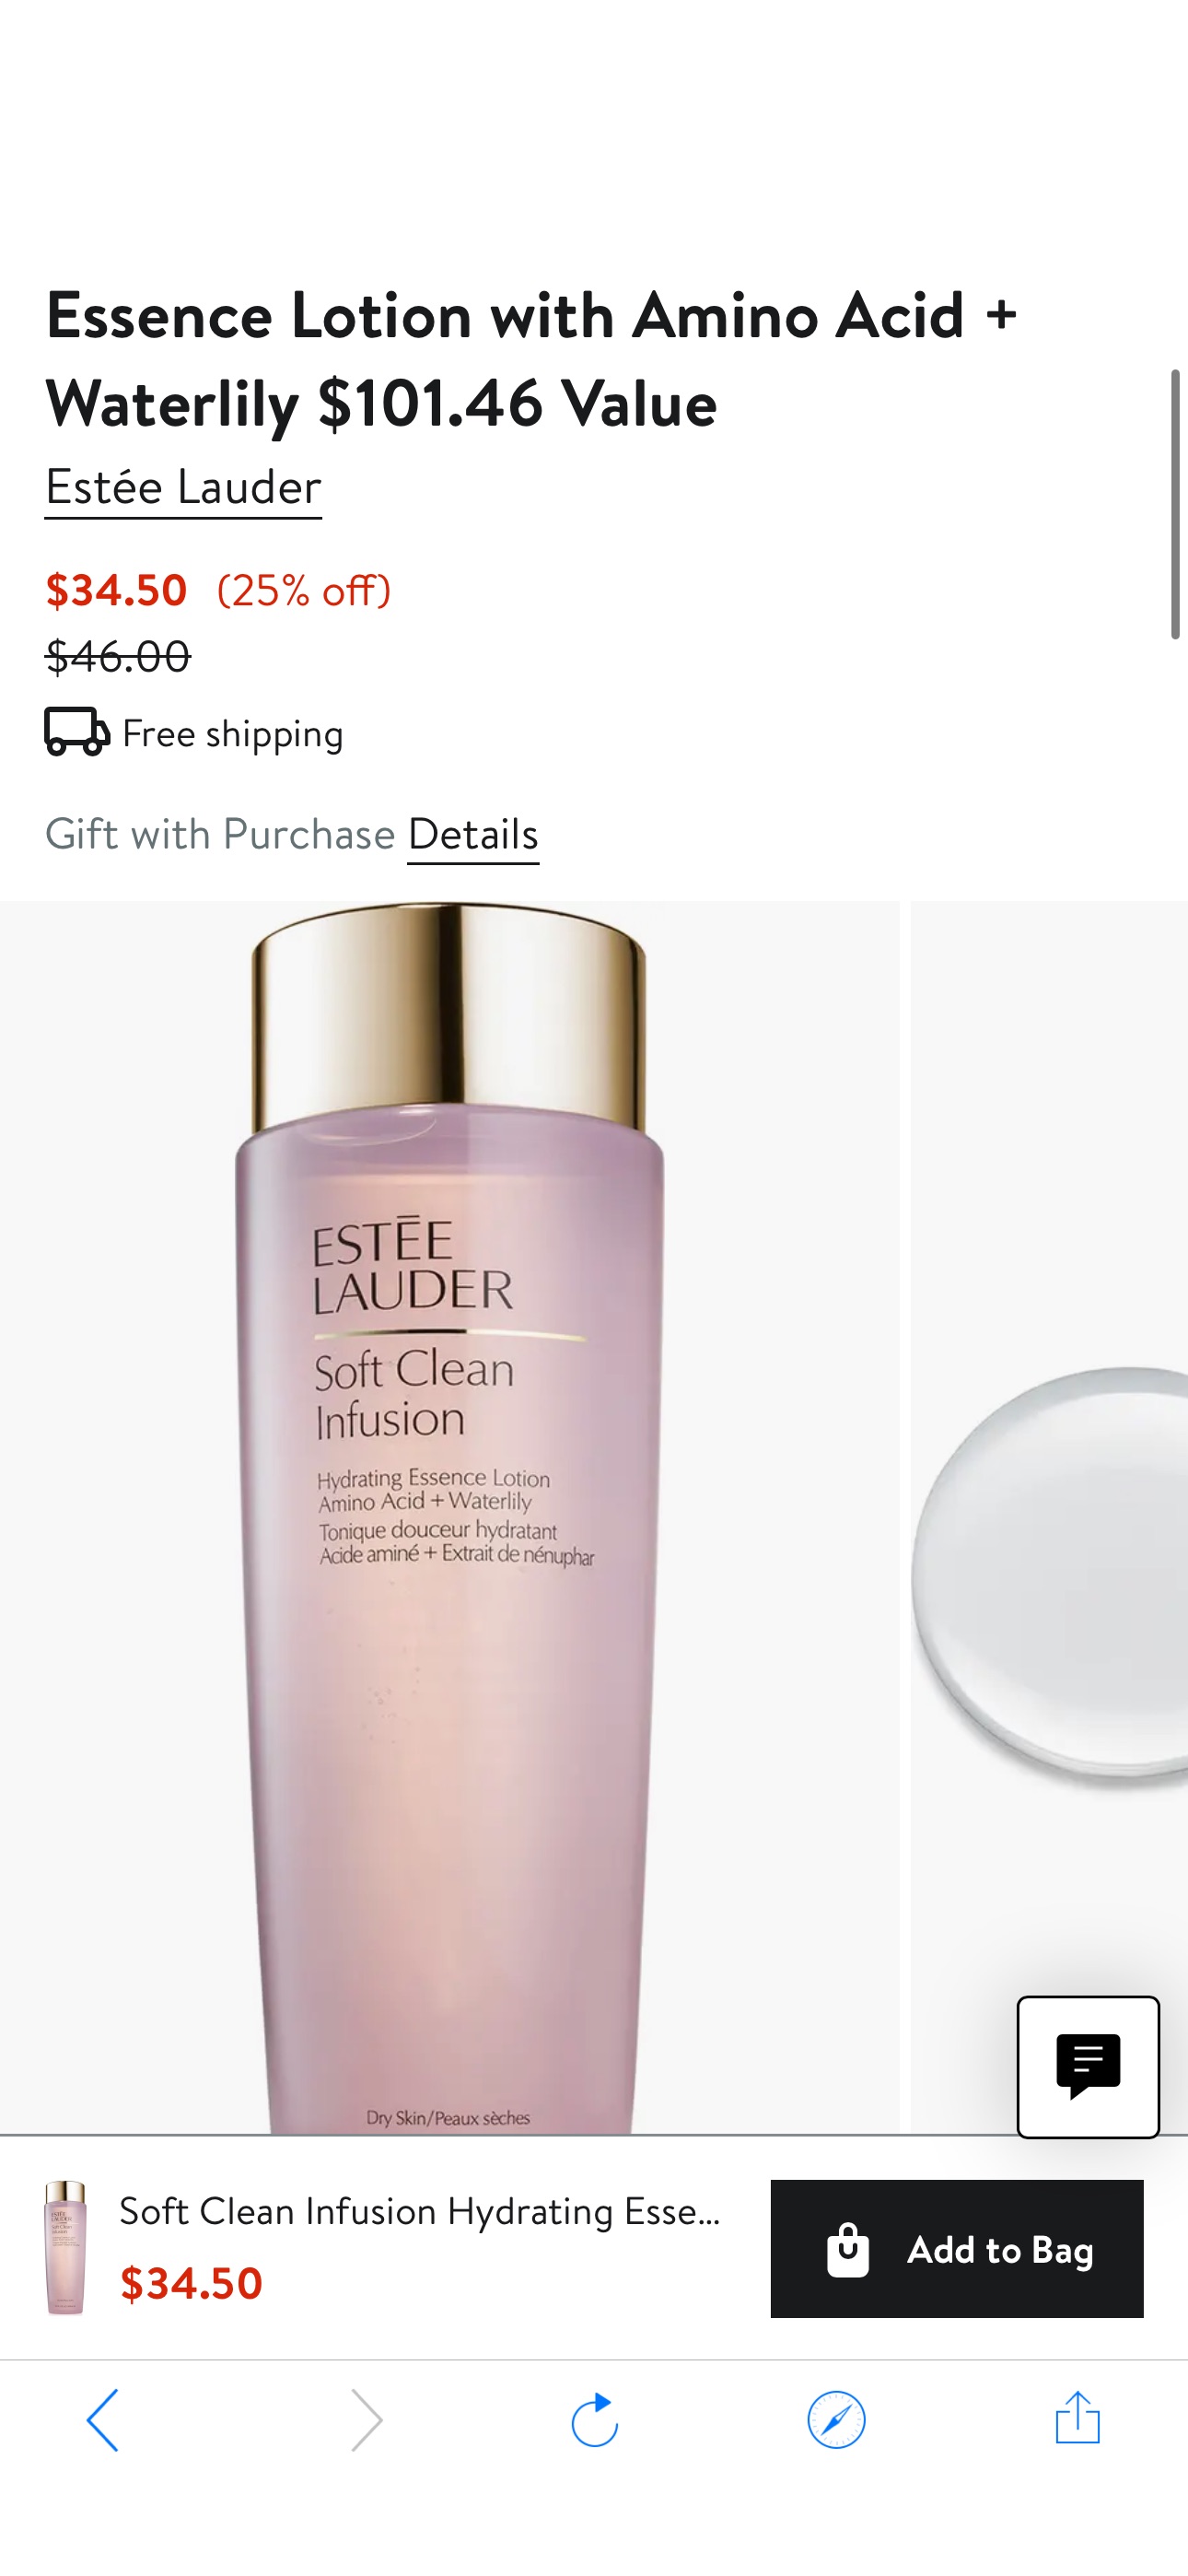 Estée Lauder Soft Clean Infusion Hydrating Essence Lotion with Amino Acid + Waterlily $101.46 Value | Nordstrom